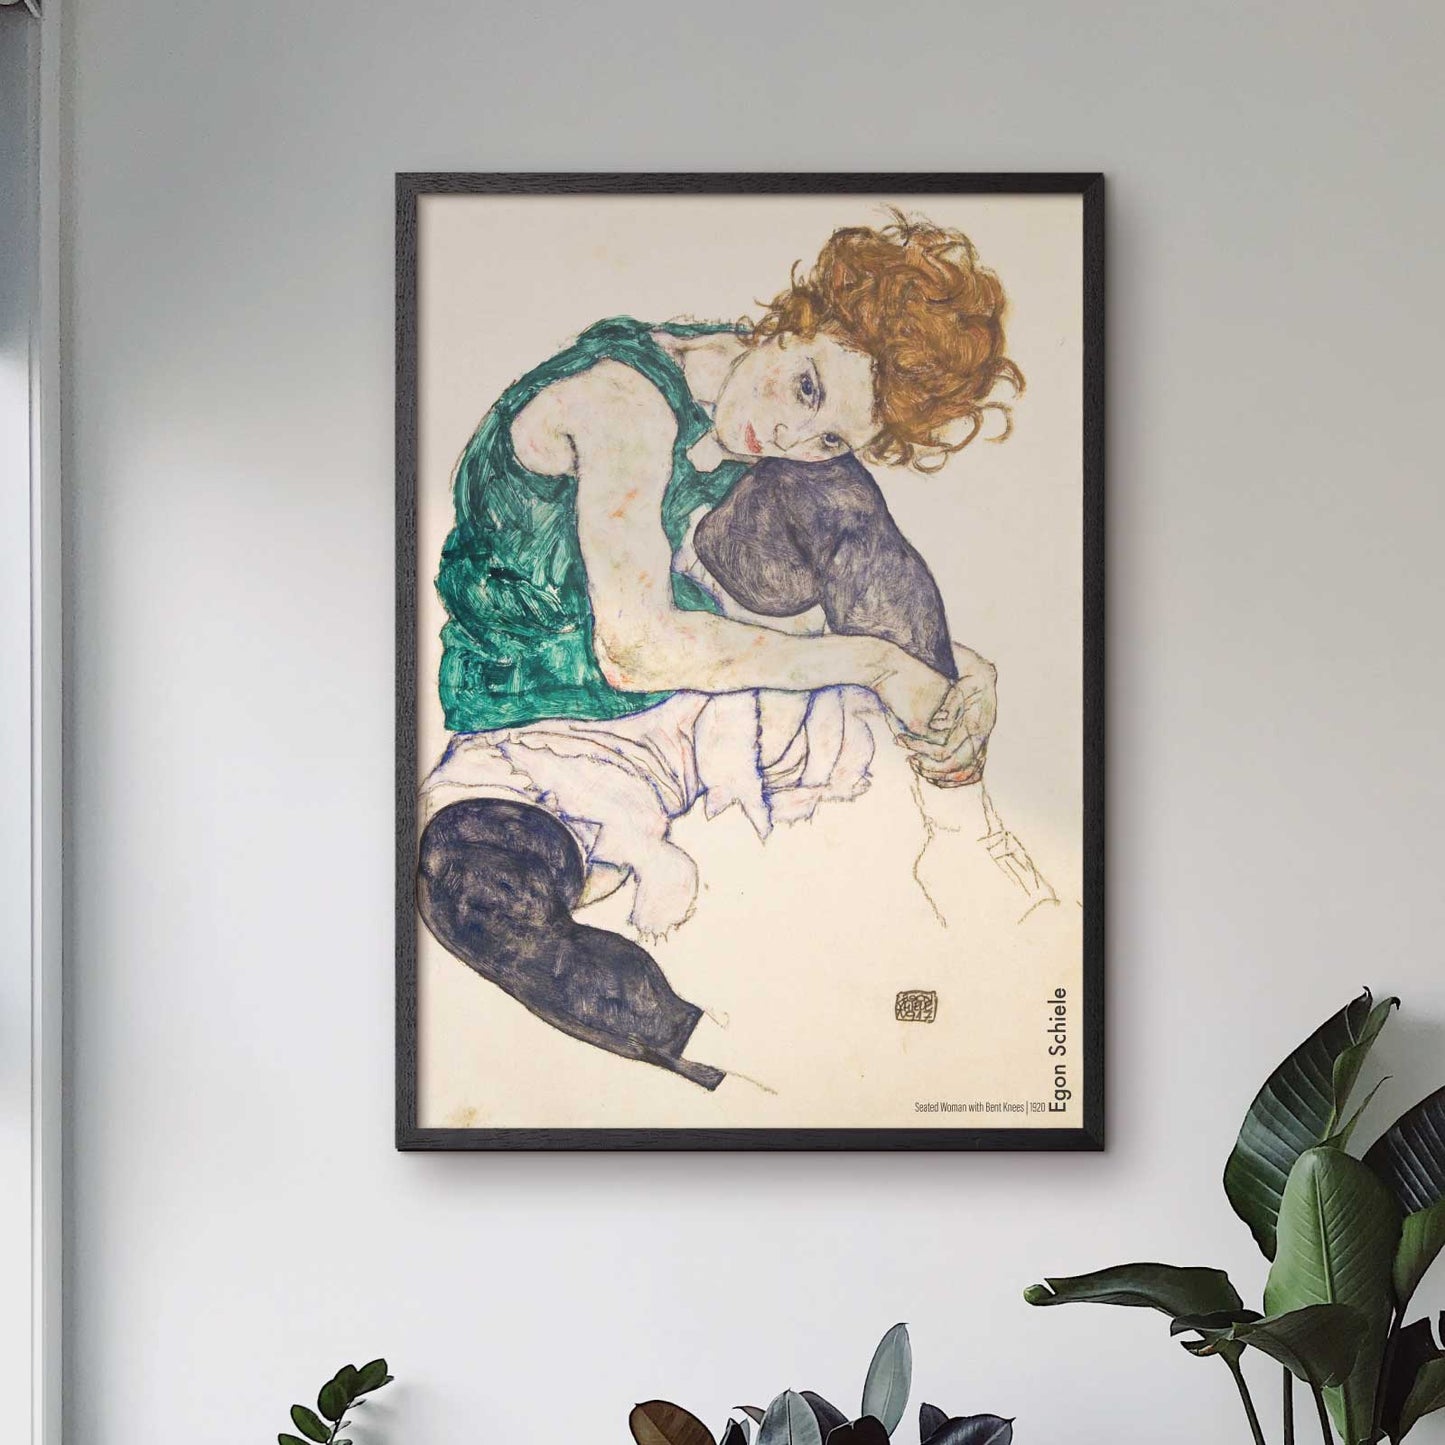 Art poster Egon Schiele sketch "Seated woman with bent knees"